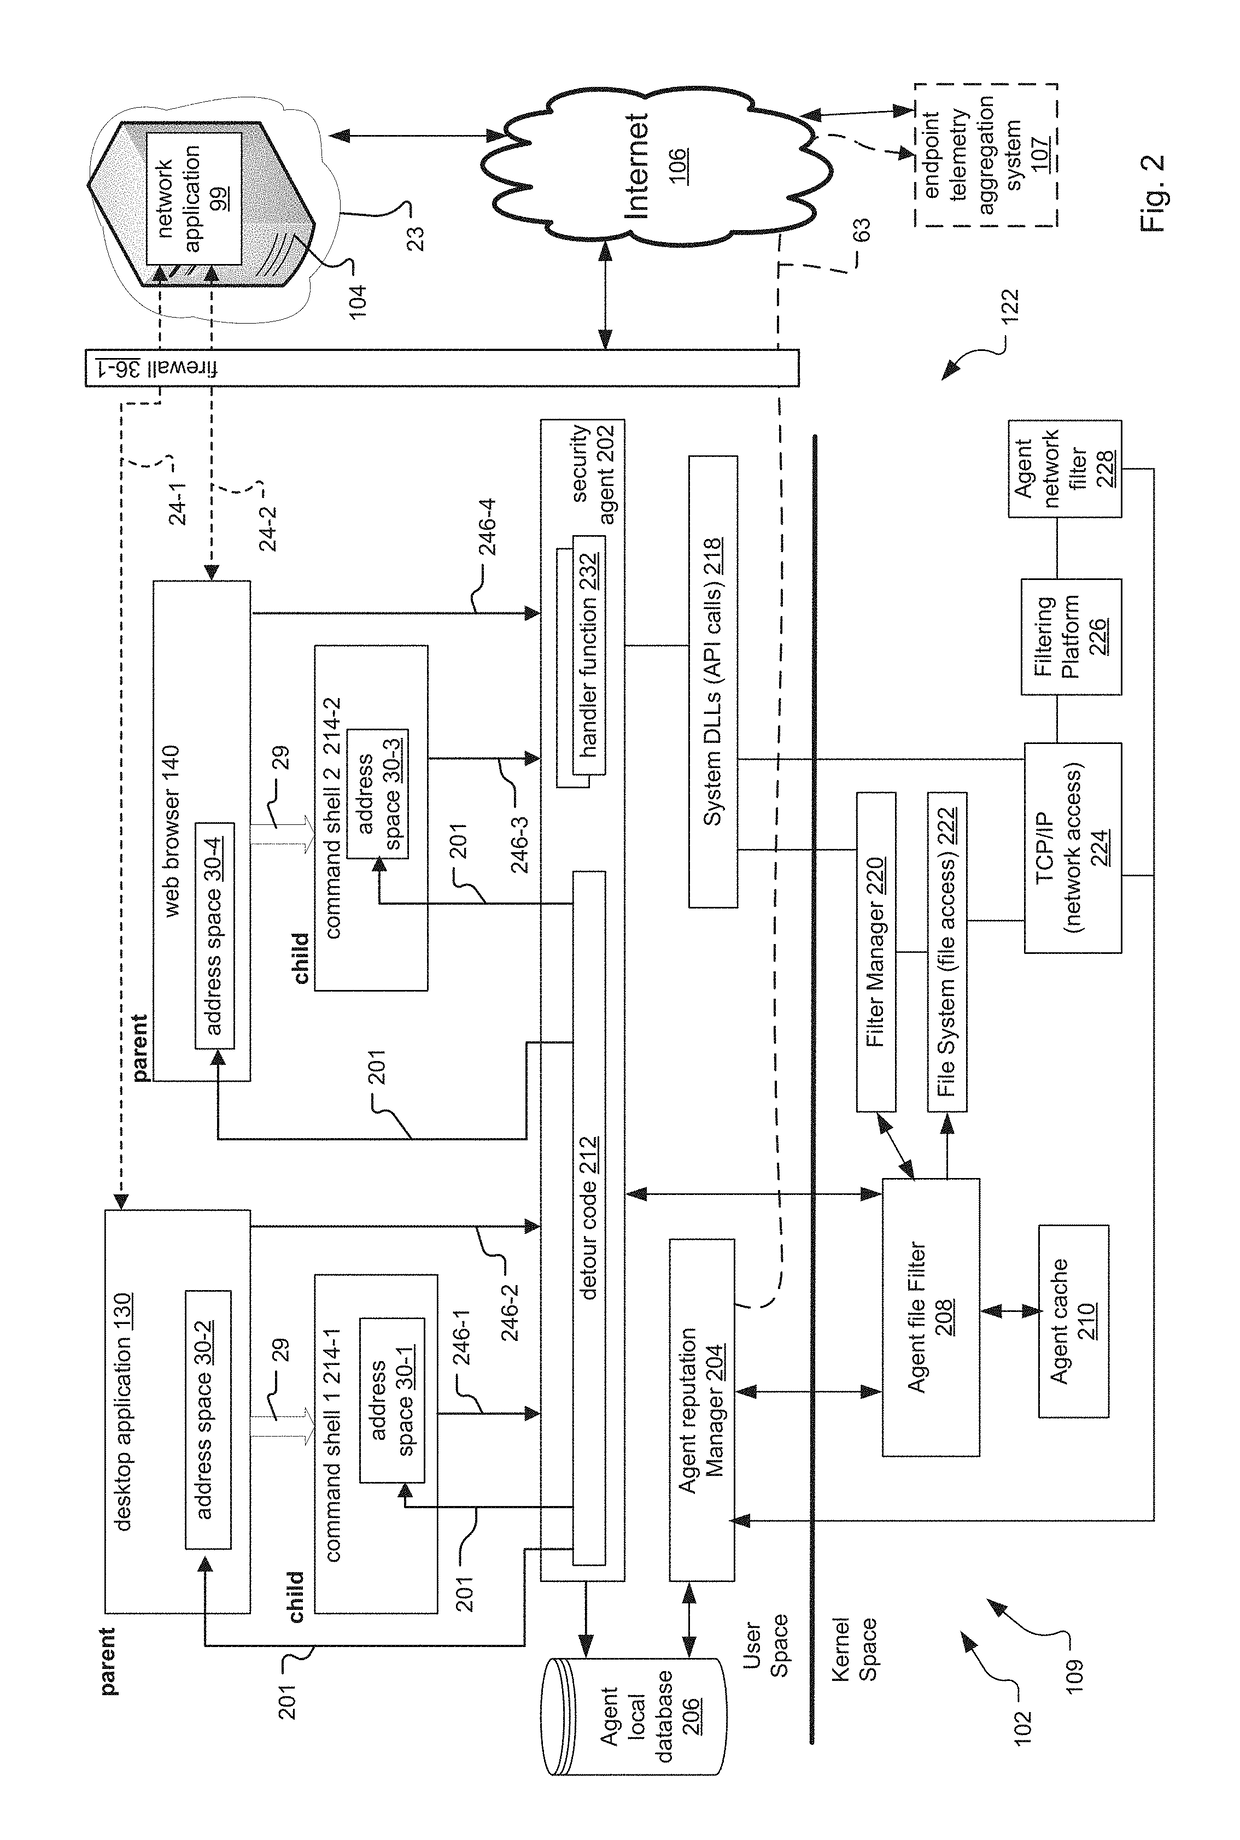 System and Method for Reverse Command Shell Detection